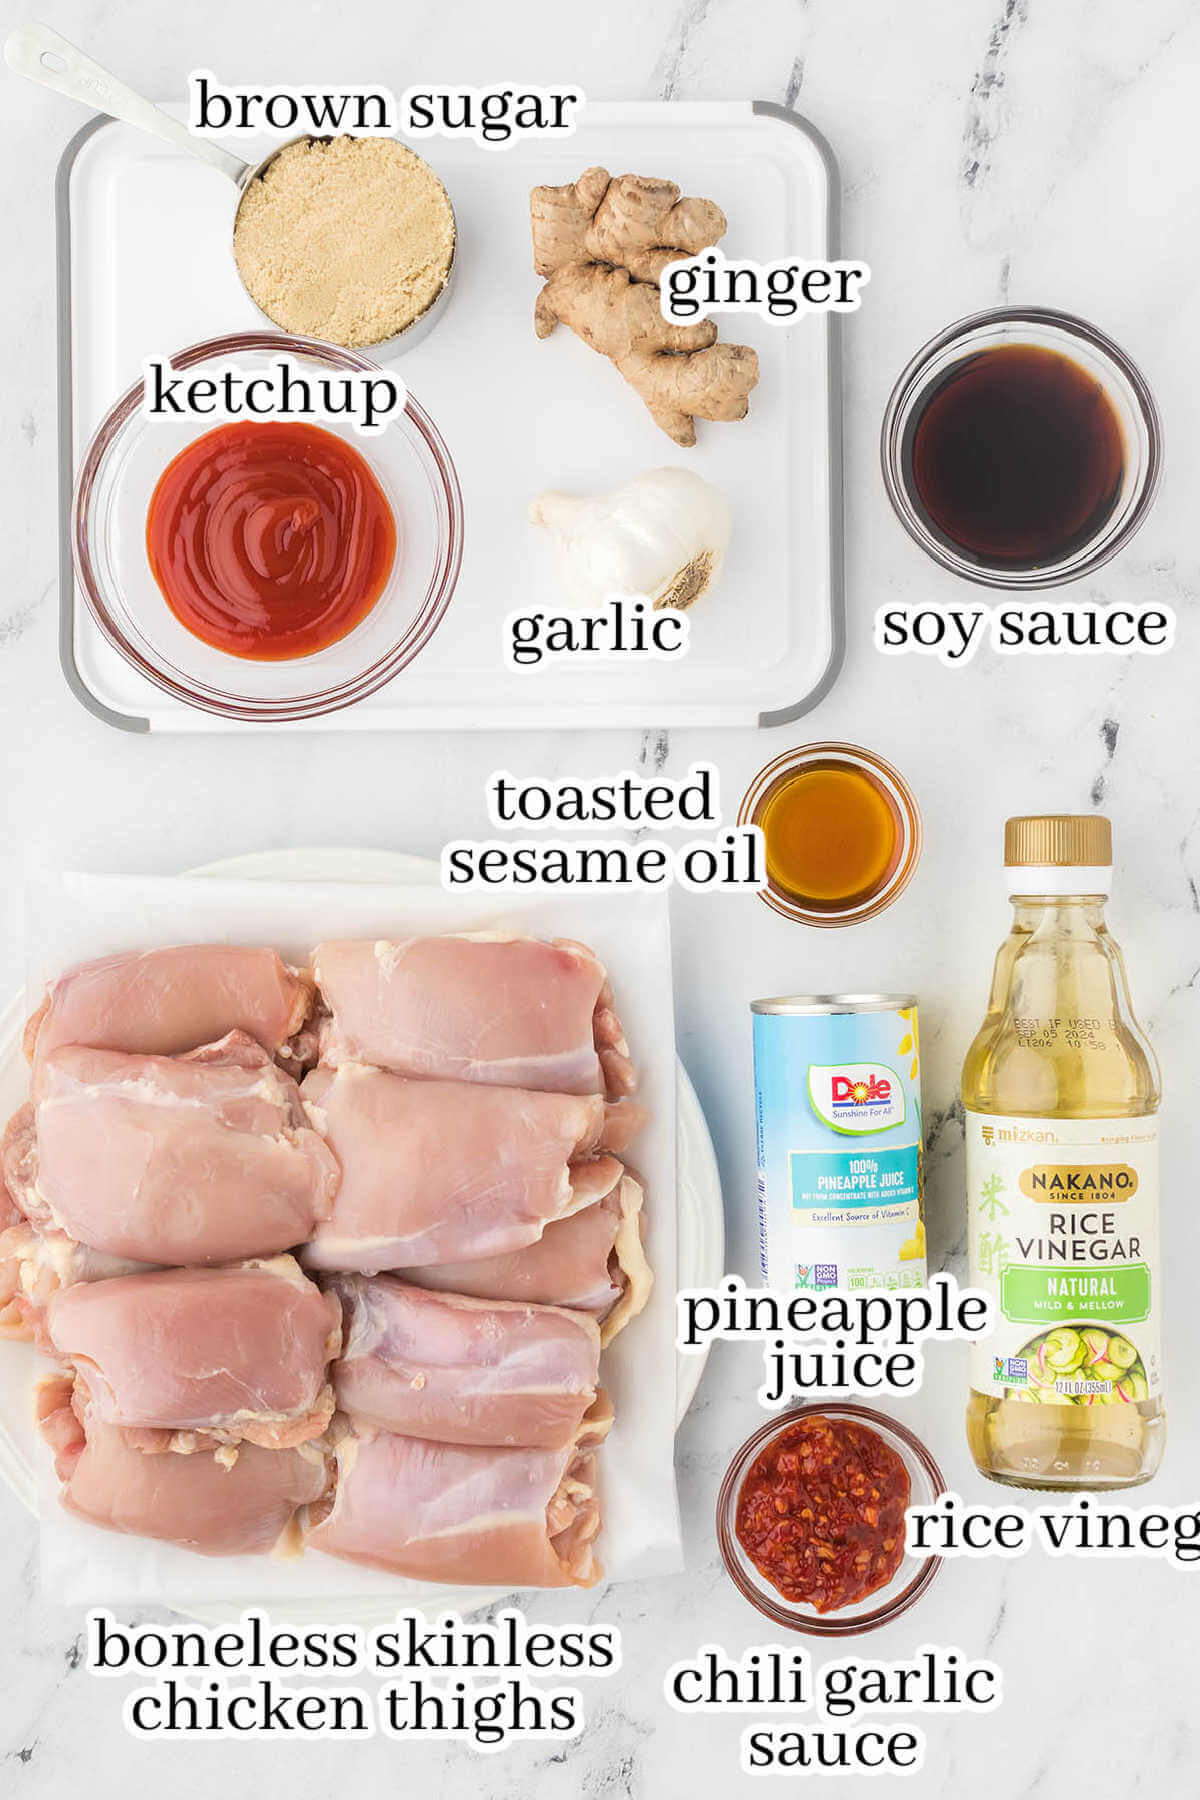 Ingredients for the chicken recipe, with print overlay.